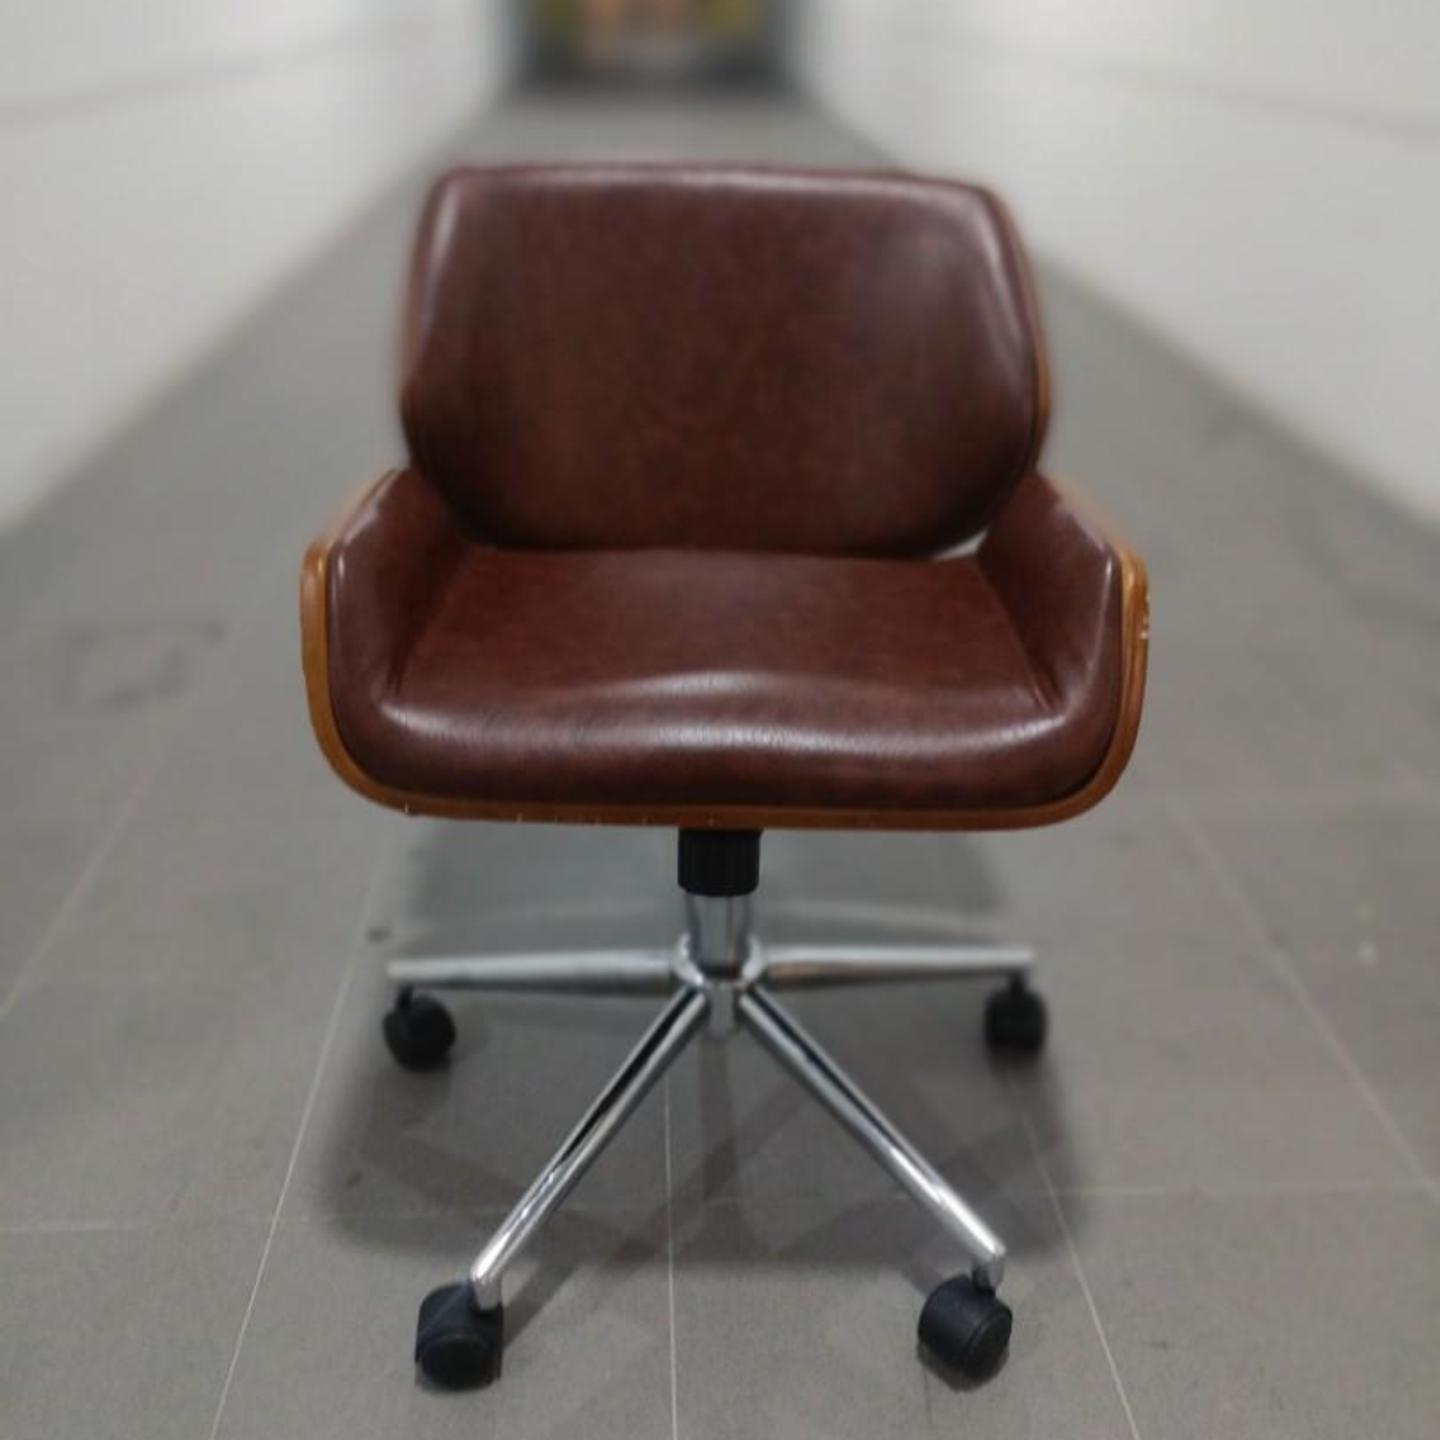 MELEX Office Chair in BROWN